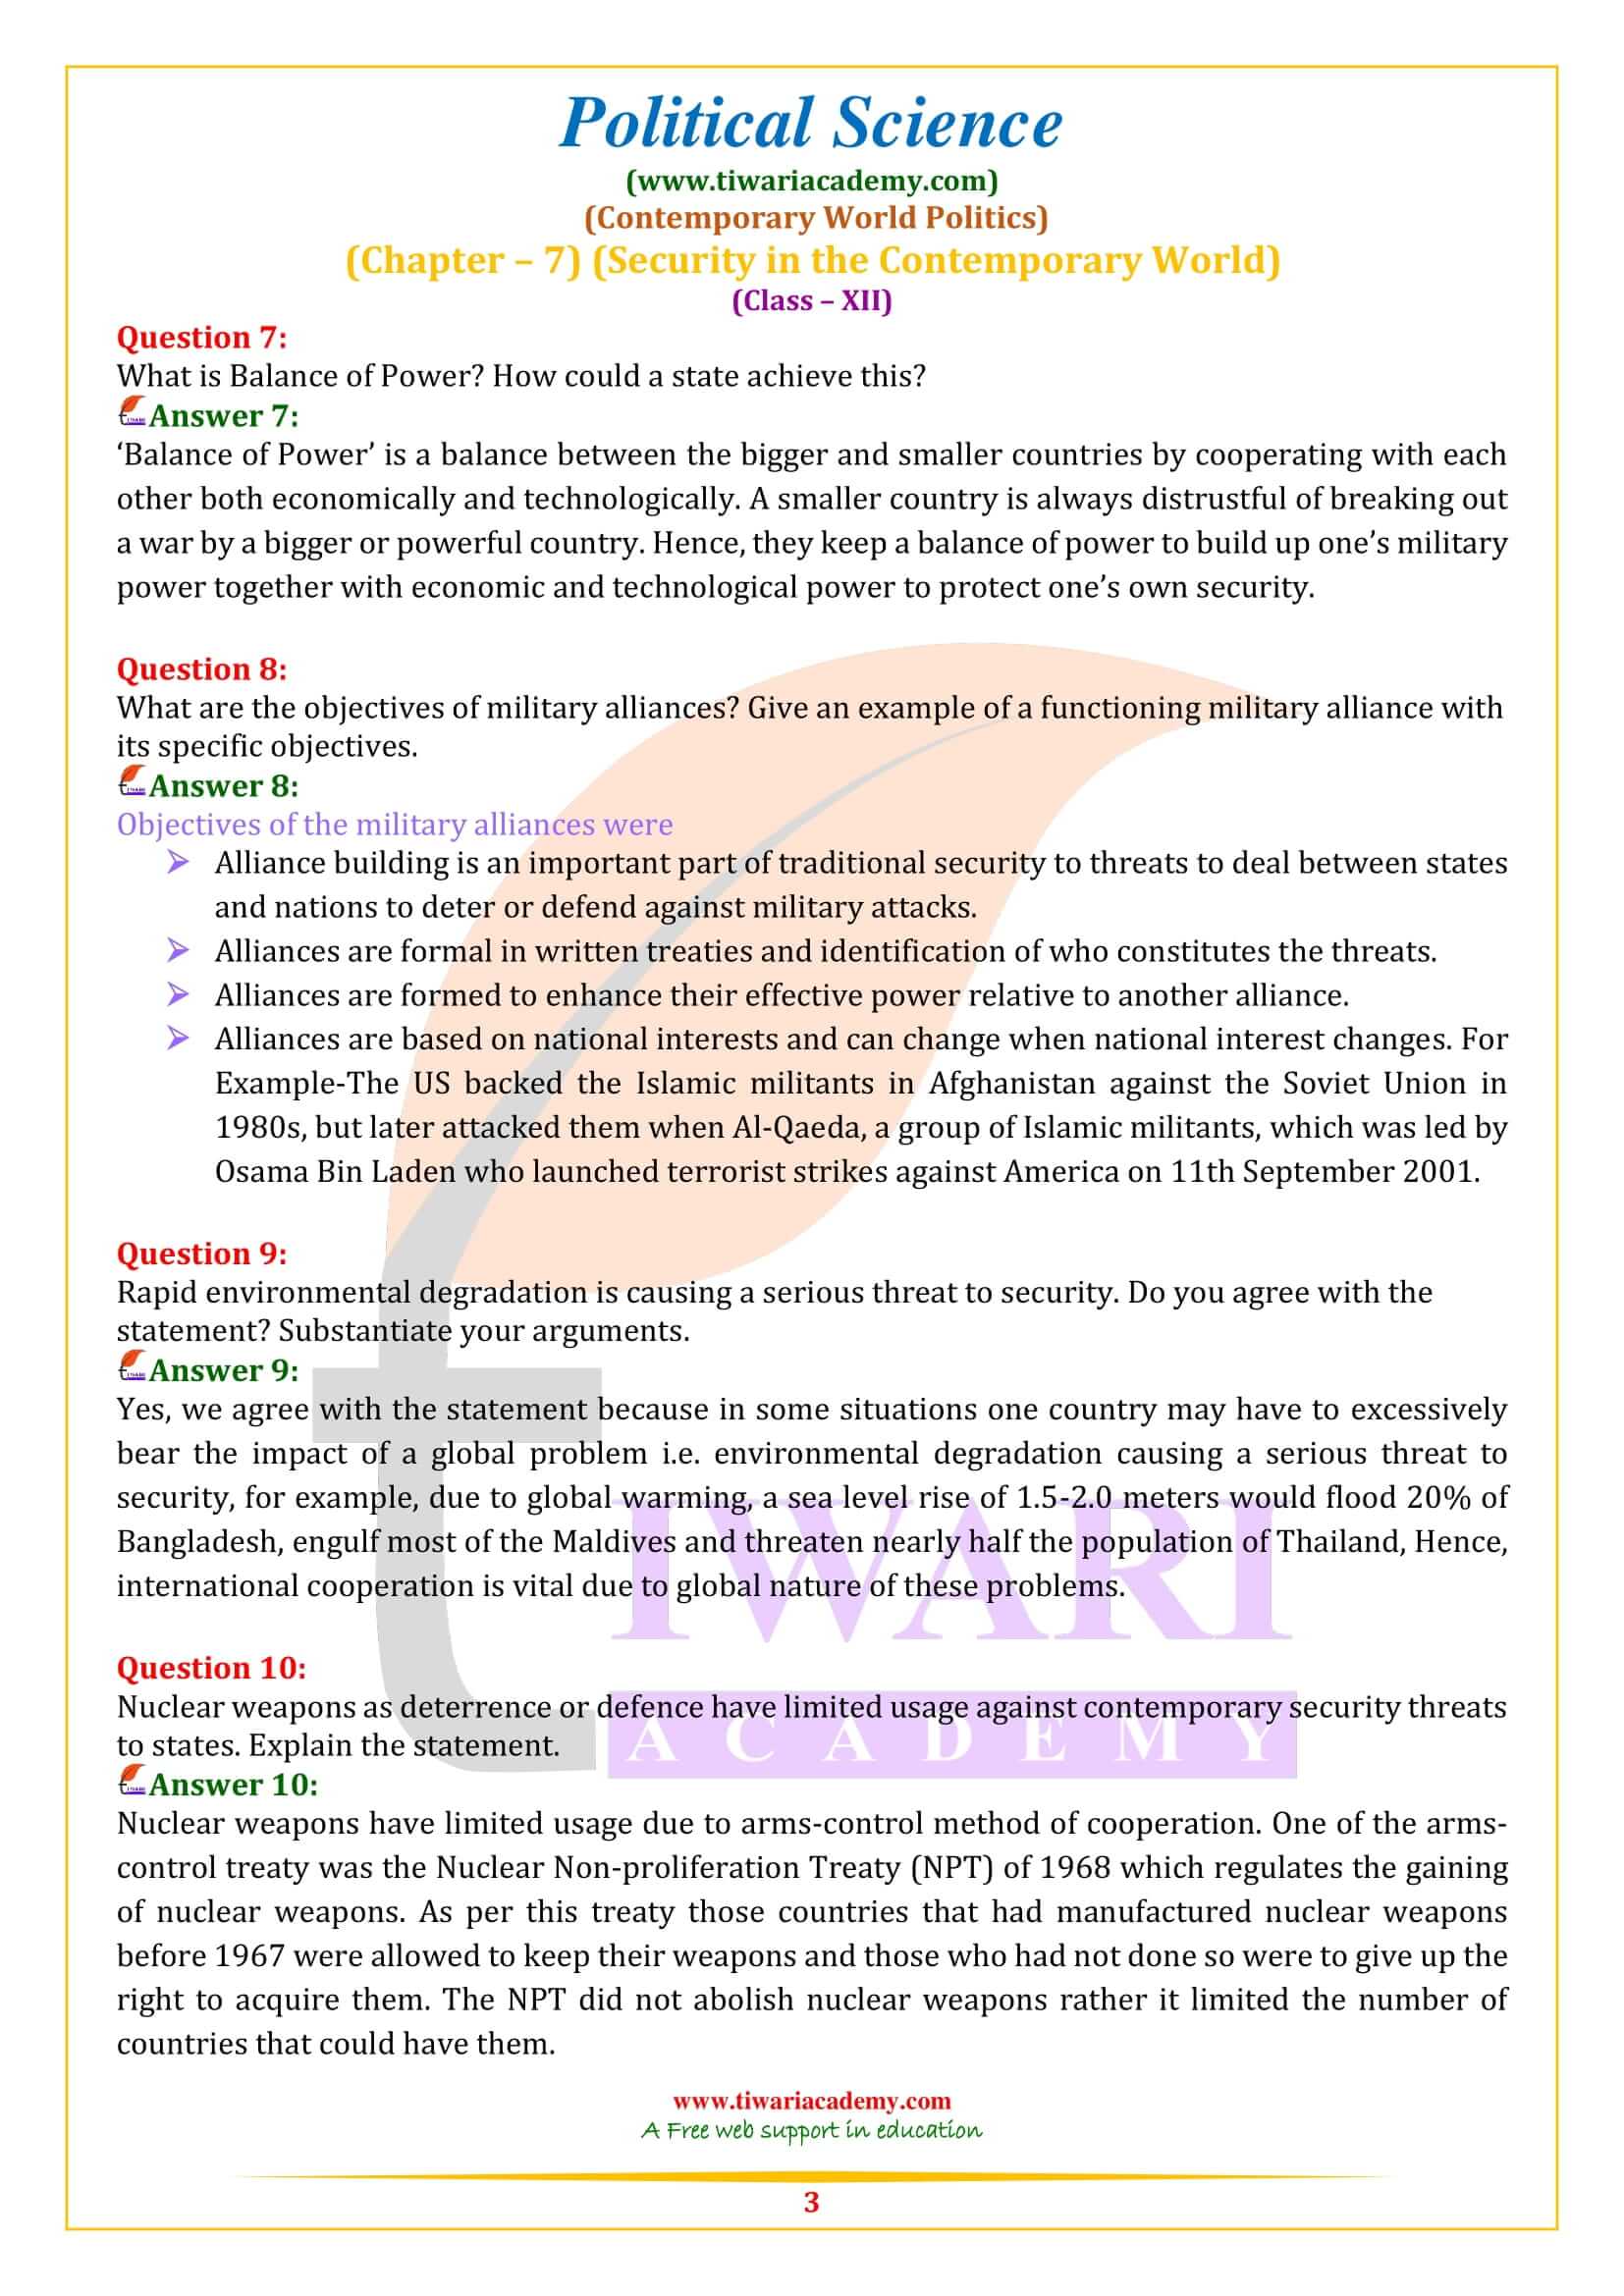 NCERT Solutions for Class 12 Political Science Chapter 7 in English Medium